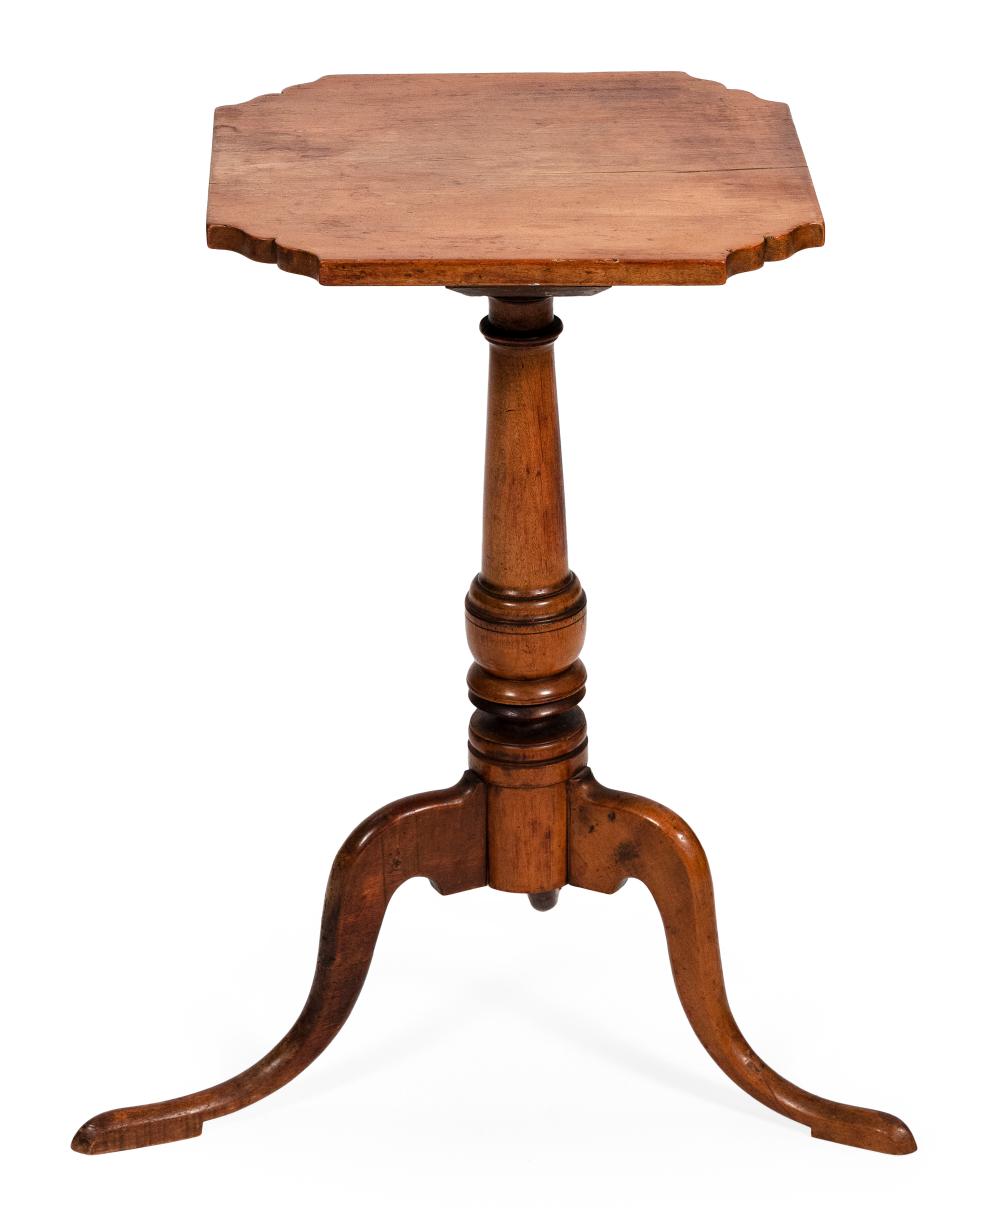 MAPLE CANDLESTAND 19TH CENTURY